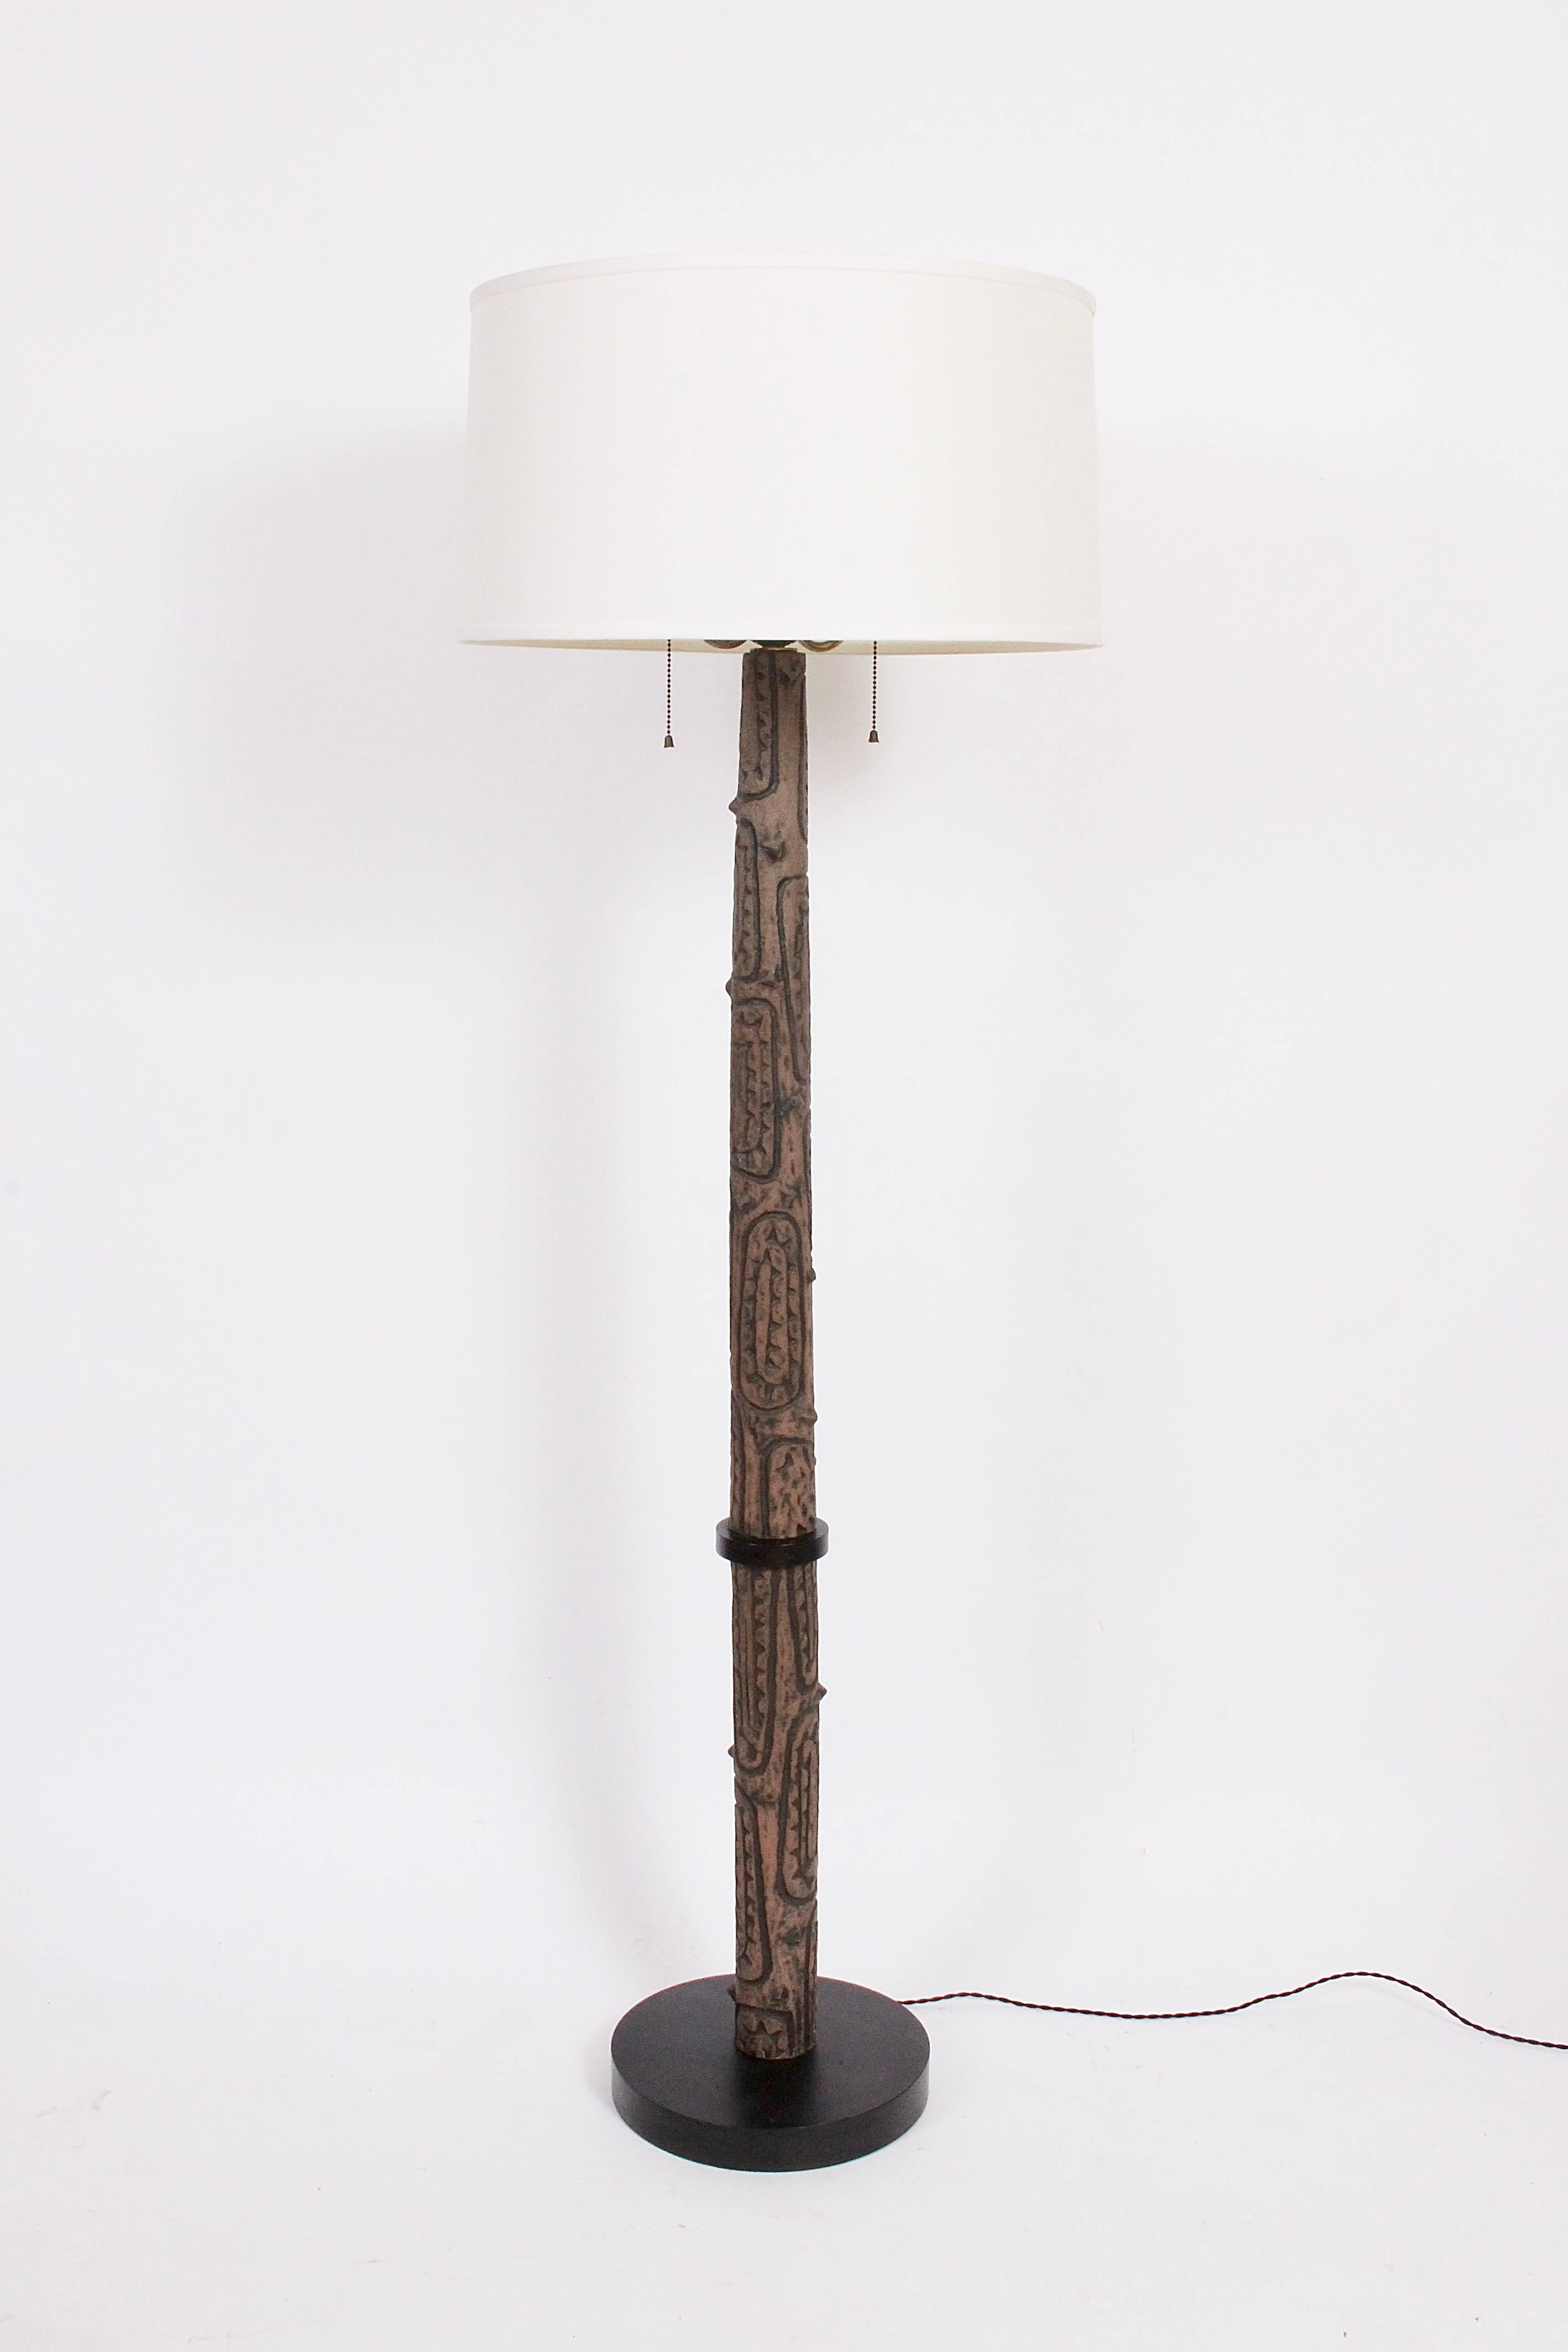 1960's Design Technics  Lee Rosen attributed Ceramic Floor Lamp with White Glass Shade. Featuring a hand crafted pattern resembling wood with smooth protruding thorn design in Brown Terracotta and Black.  On round Black enameled wood base. With